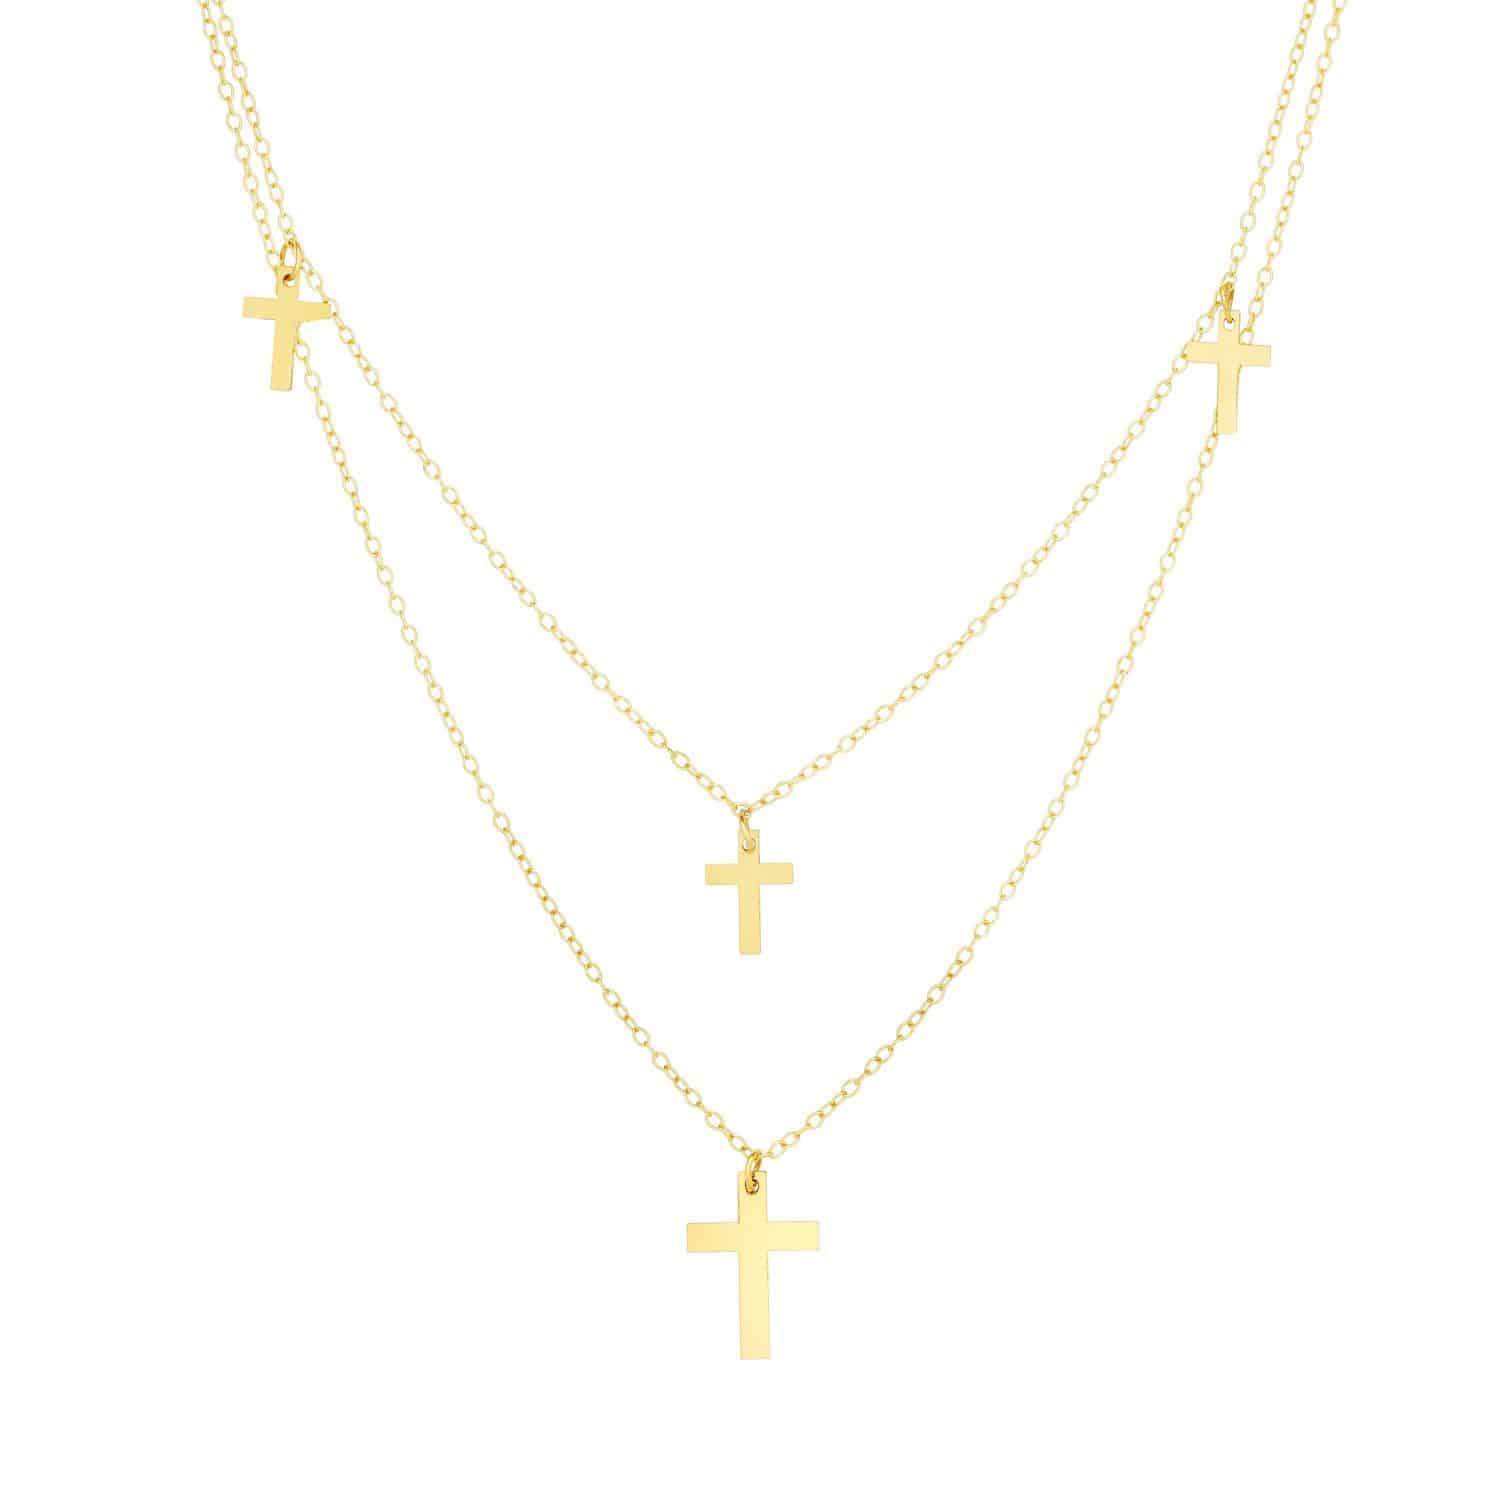 14K Yellow Gold Multi-Strand Cross Pendant Cable Chain Necklace 16"-18" Adjust.